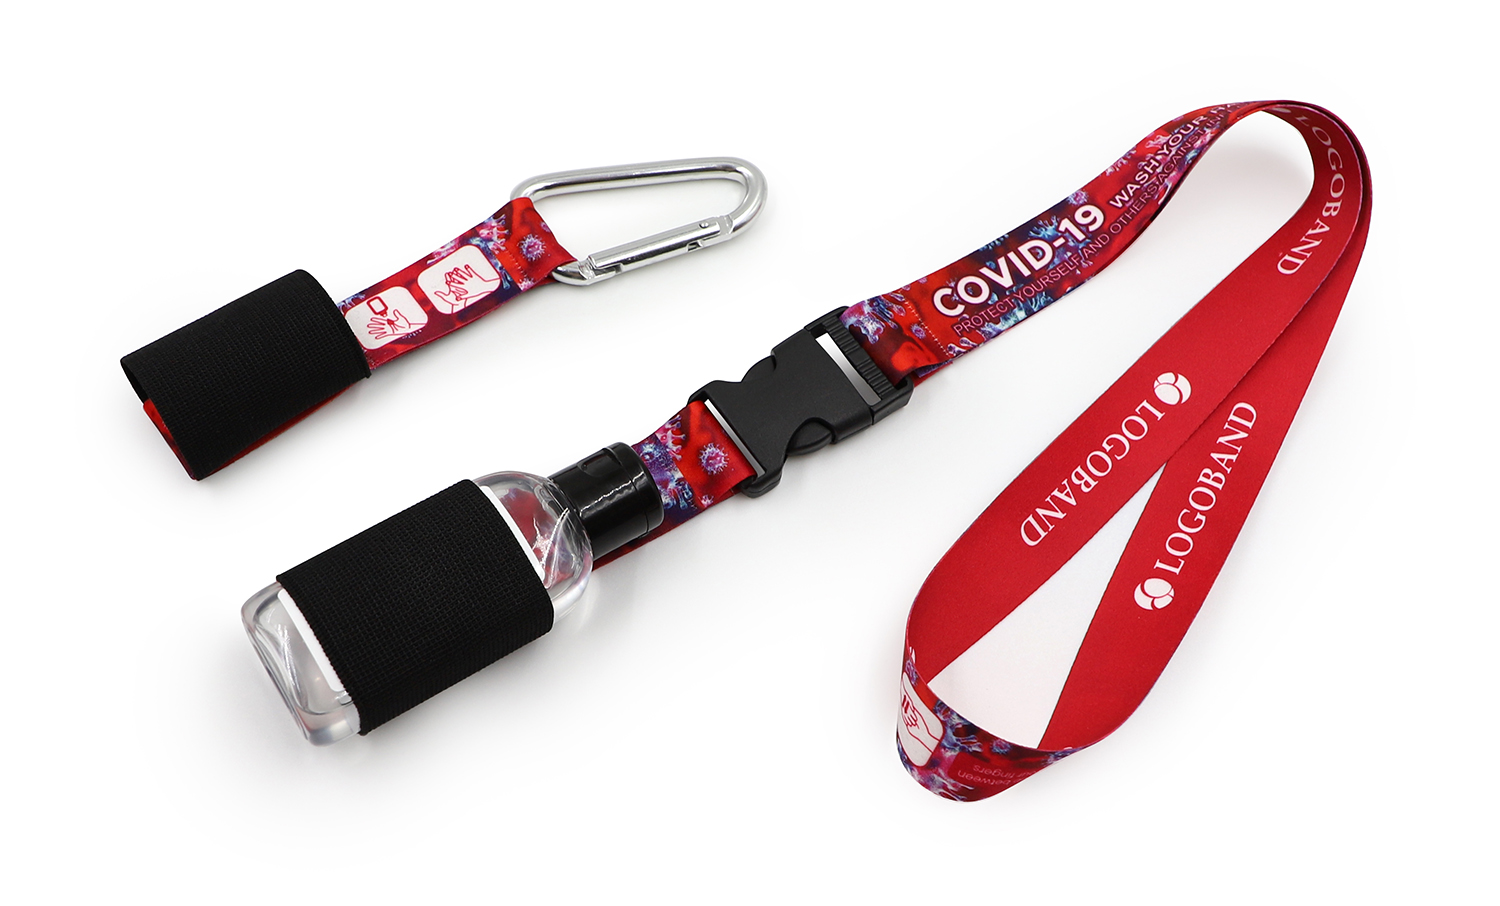 Lanyard with an elastic band